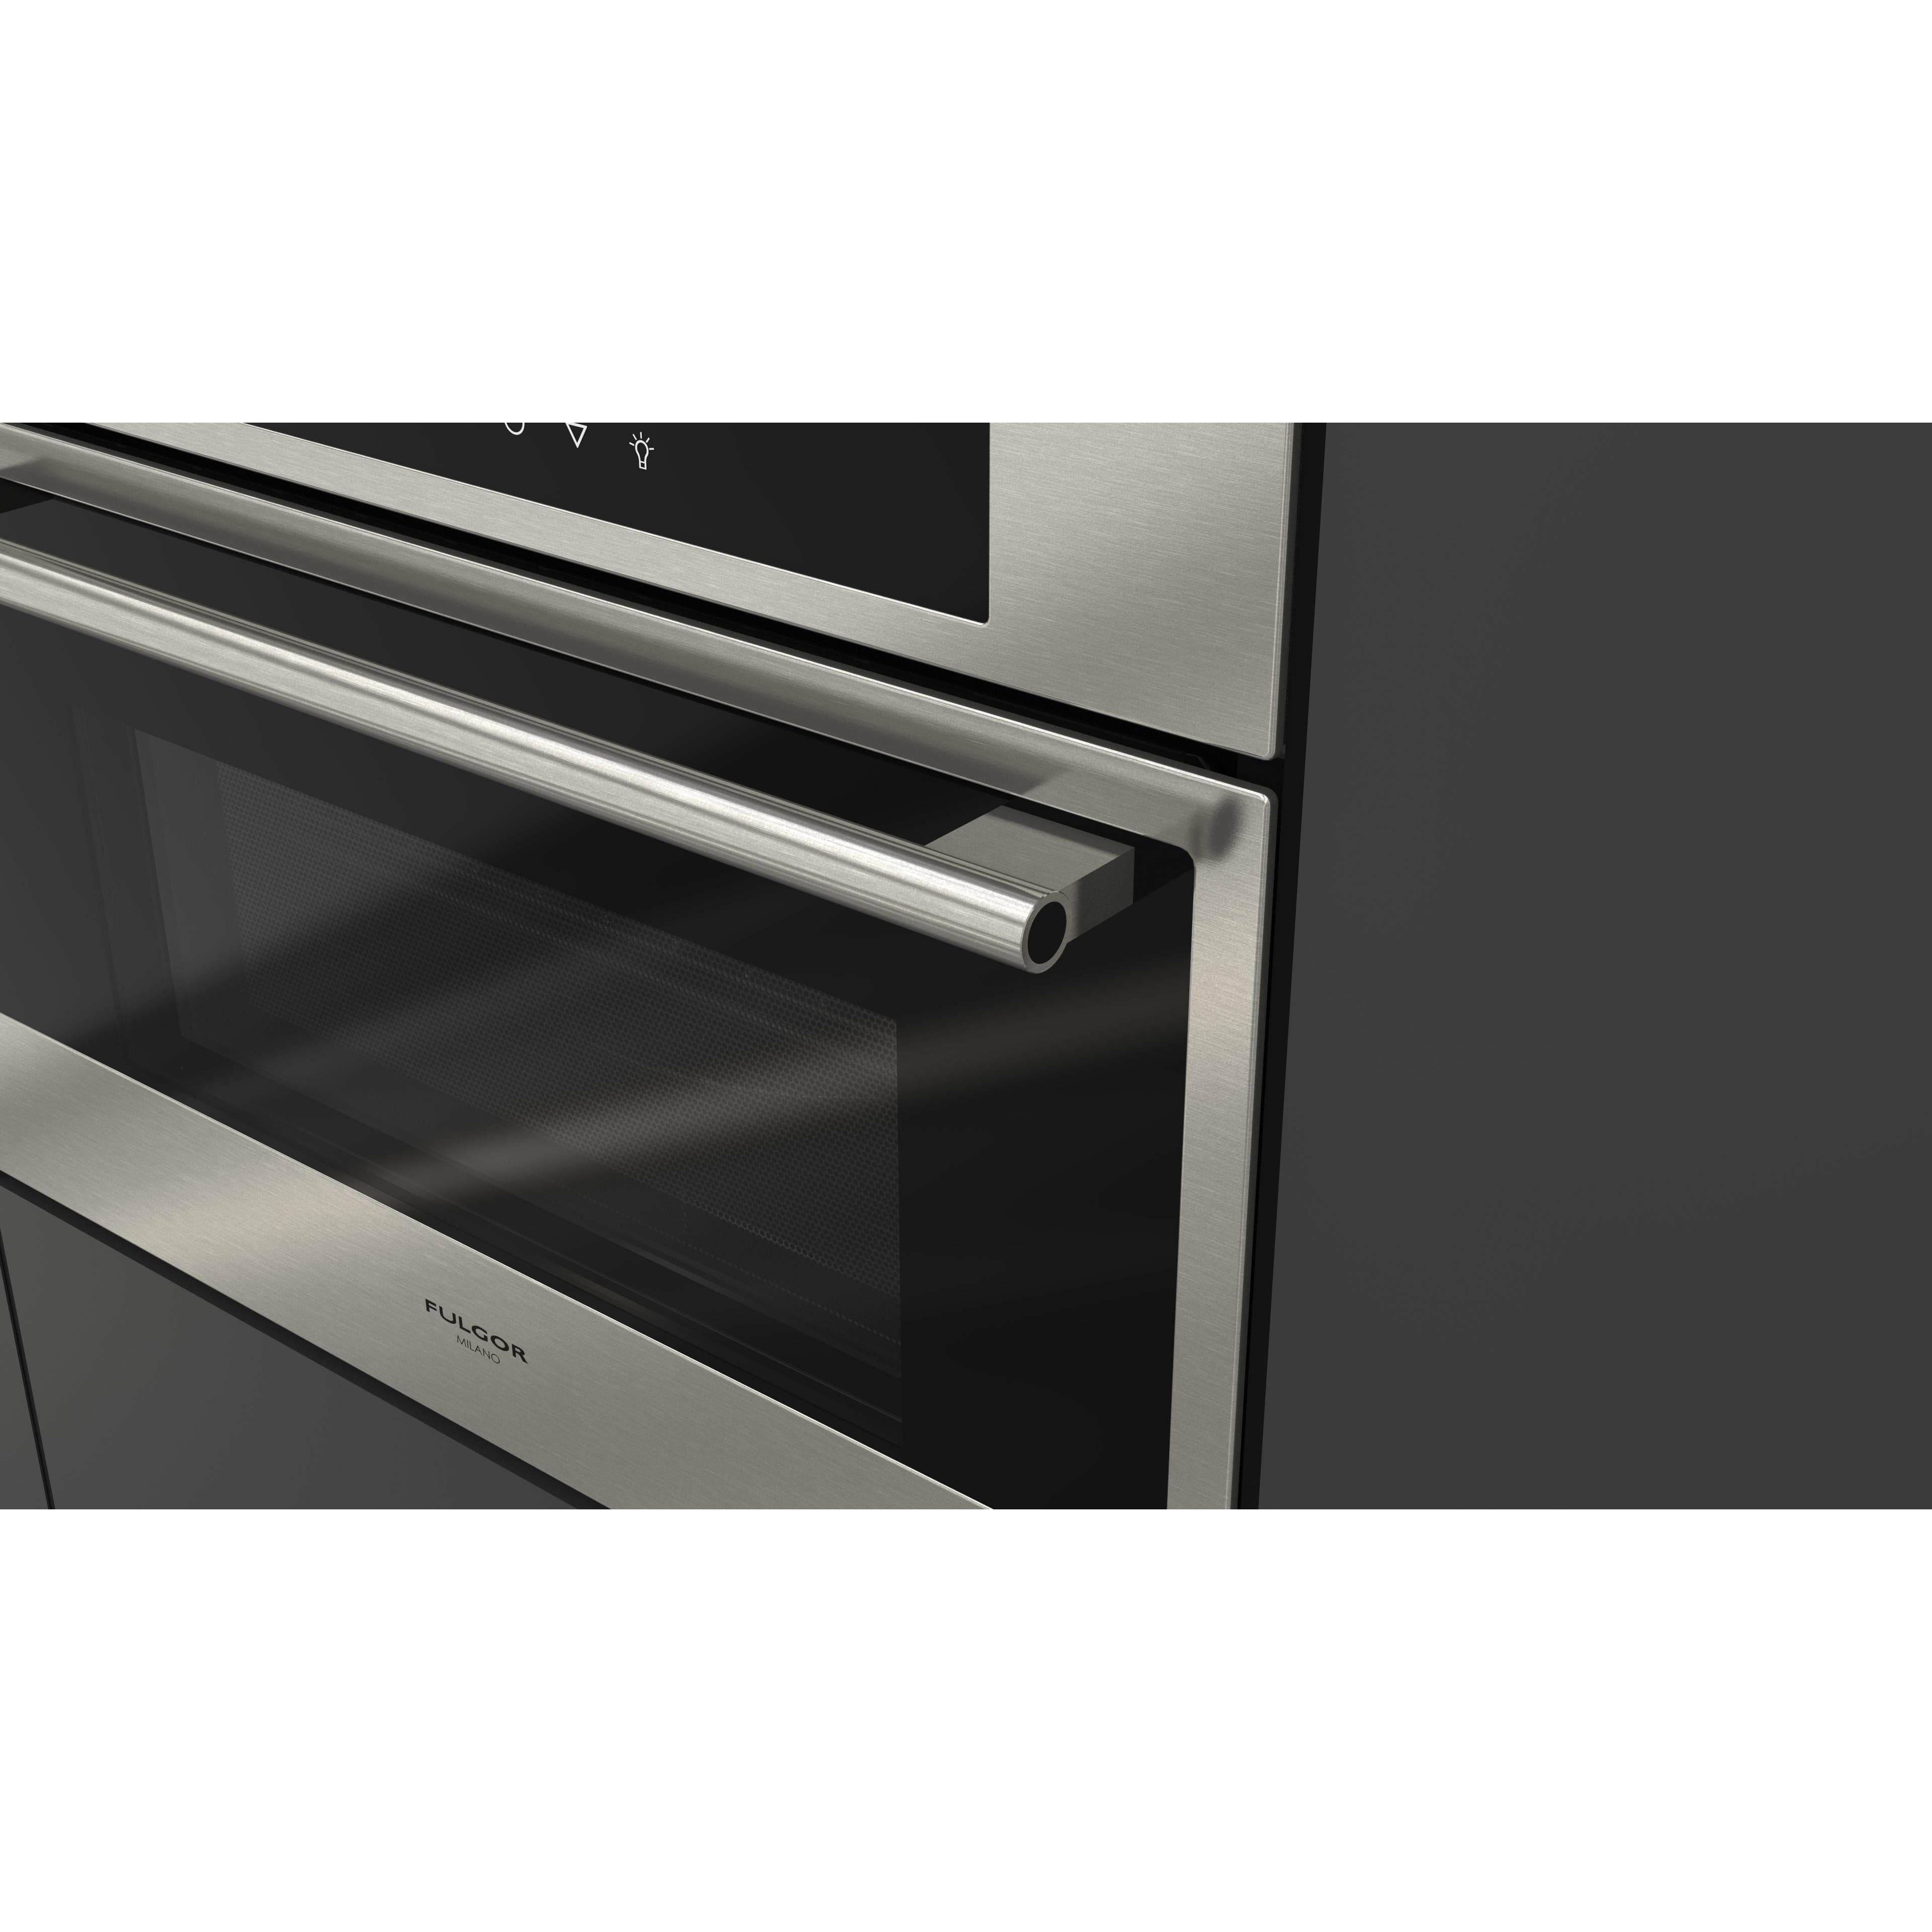 Fulgor Milano 24" 1.2 cu. ft. Total Capacity Electric Combination Single Wall Oven with 1 Oven Rack Convection - F7DSPD24S1 Wall Oven F7DSPD24S1 Luxury Appliances Direct